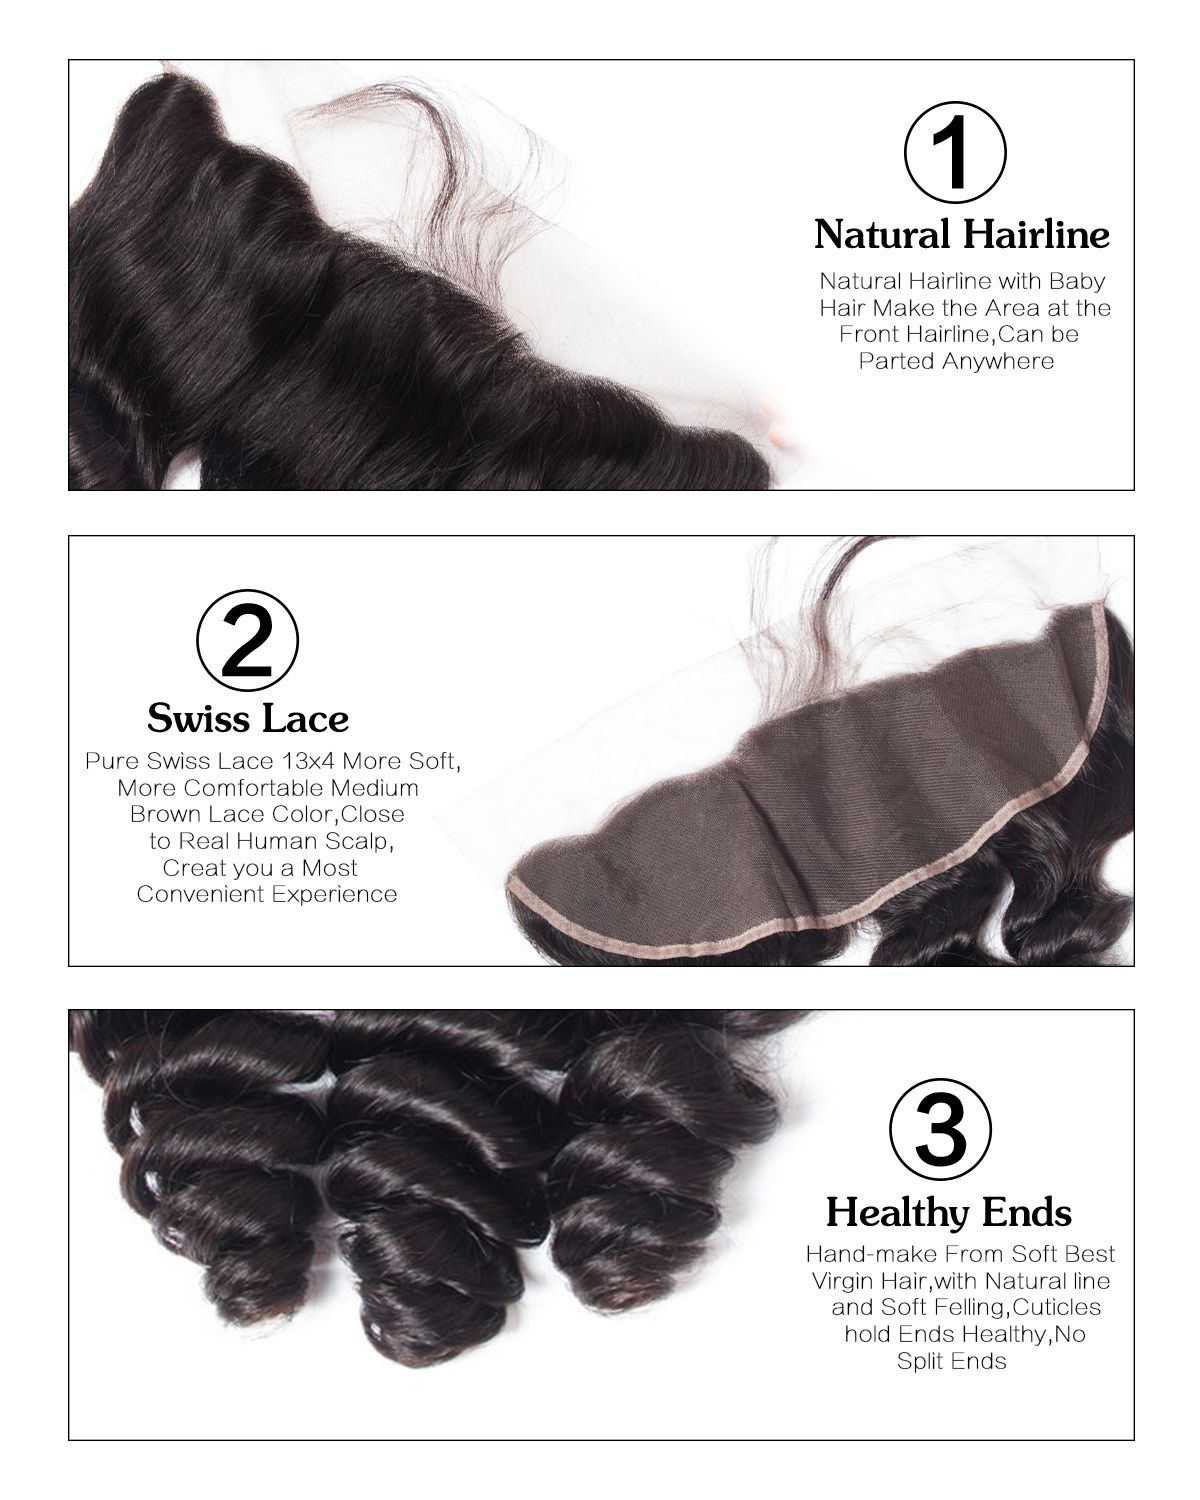 Loose Wave 4 Bundles With Frontal